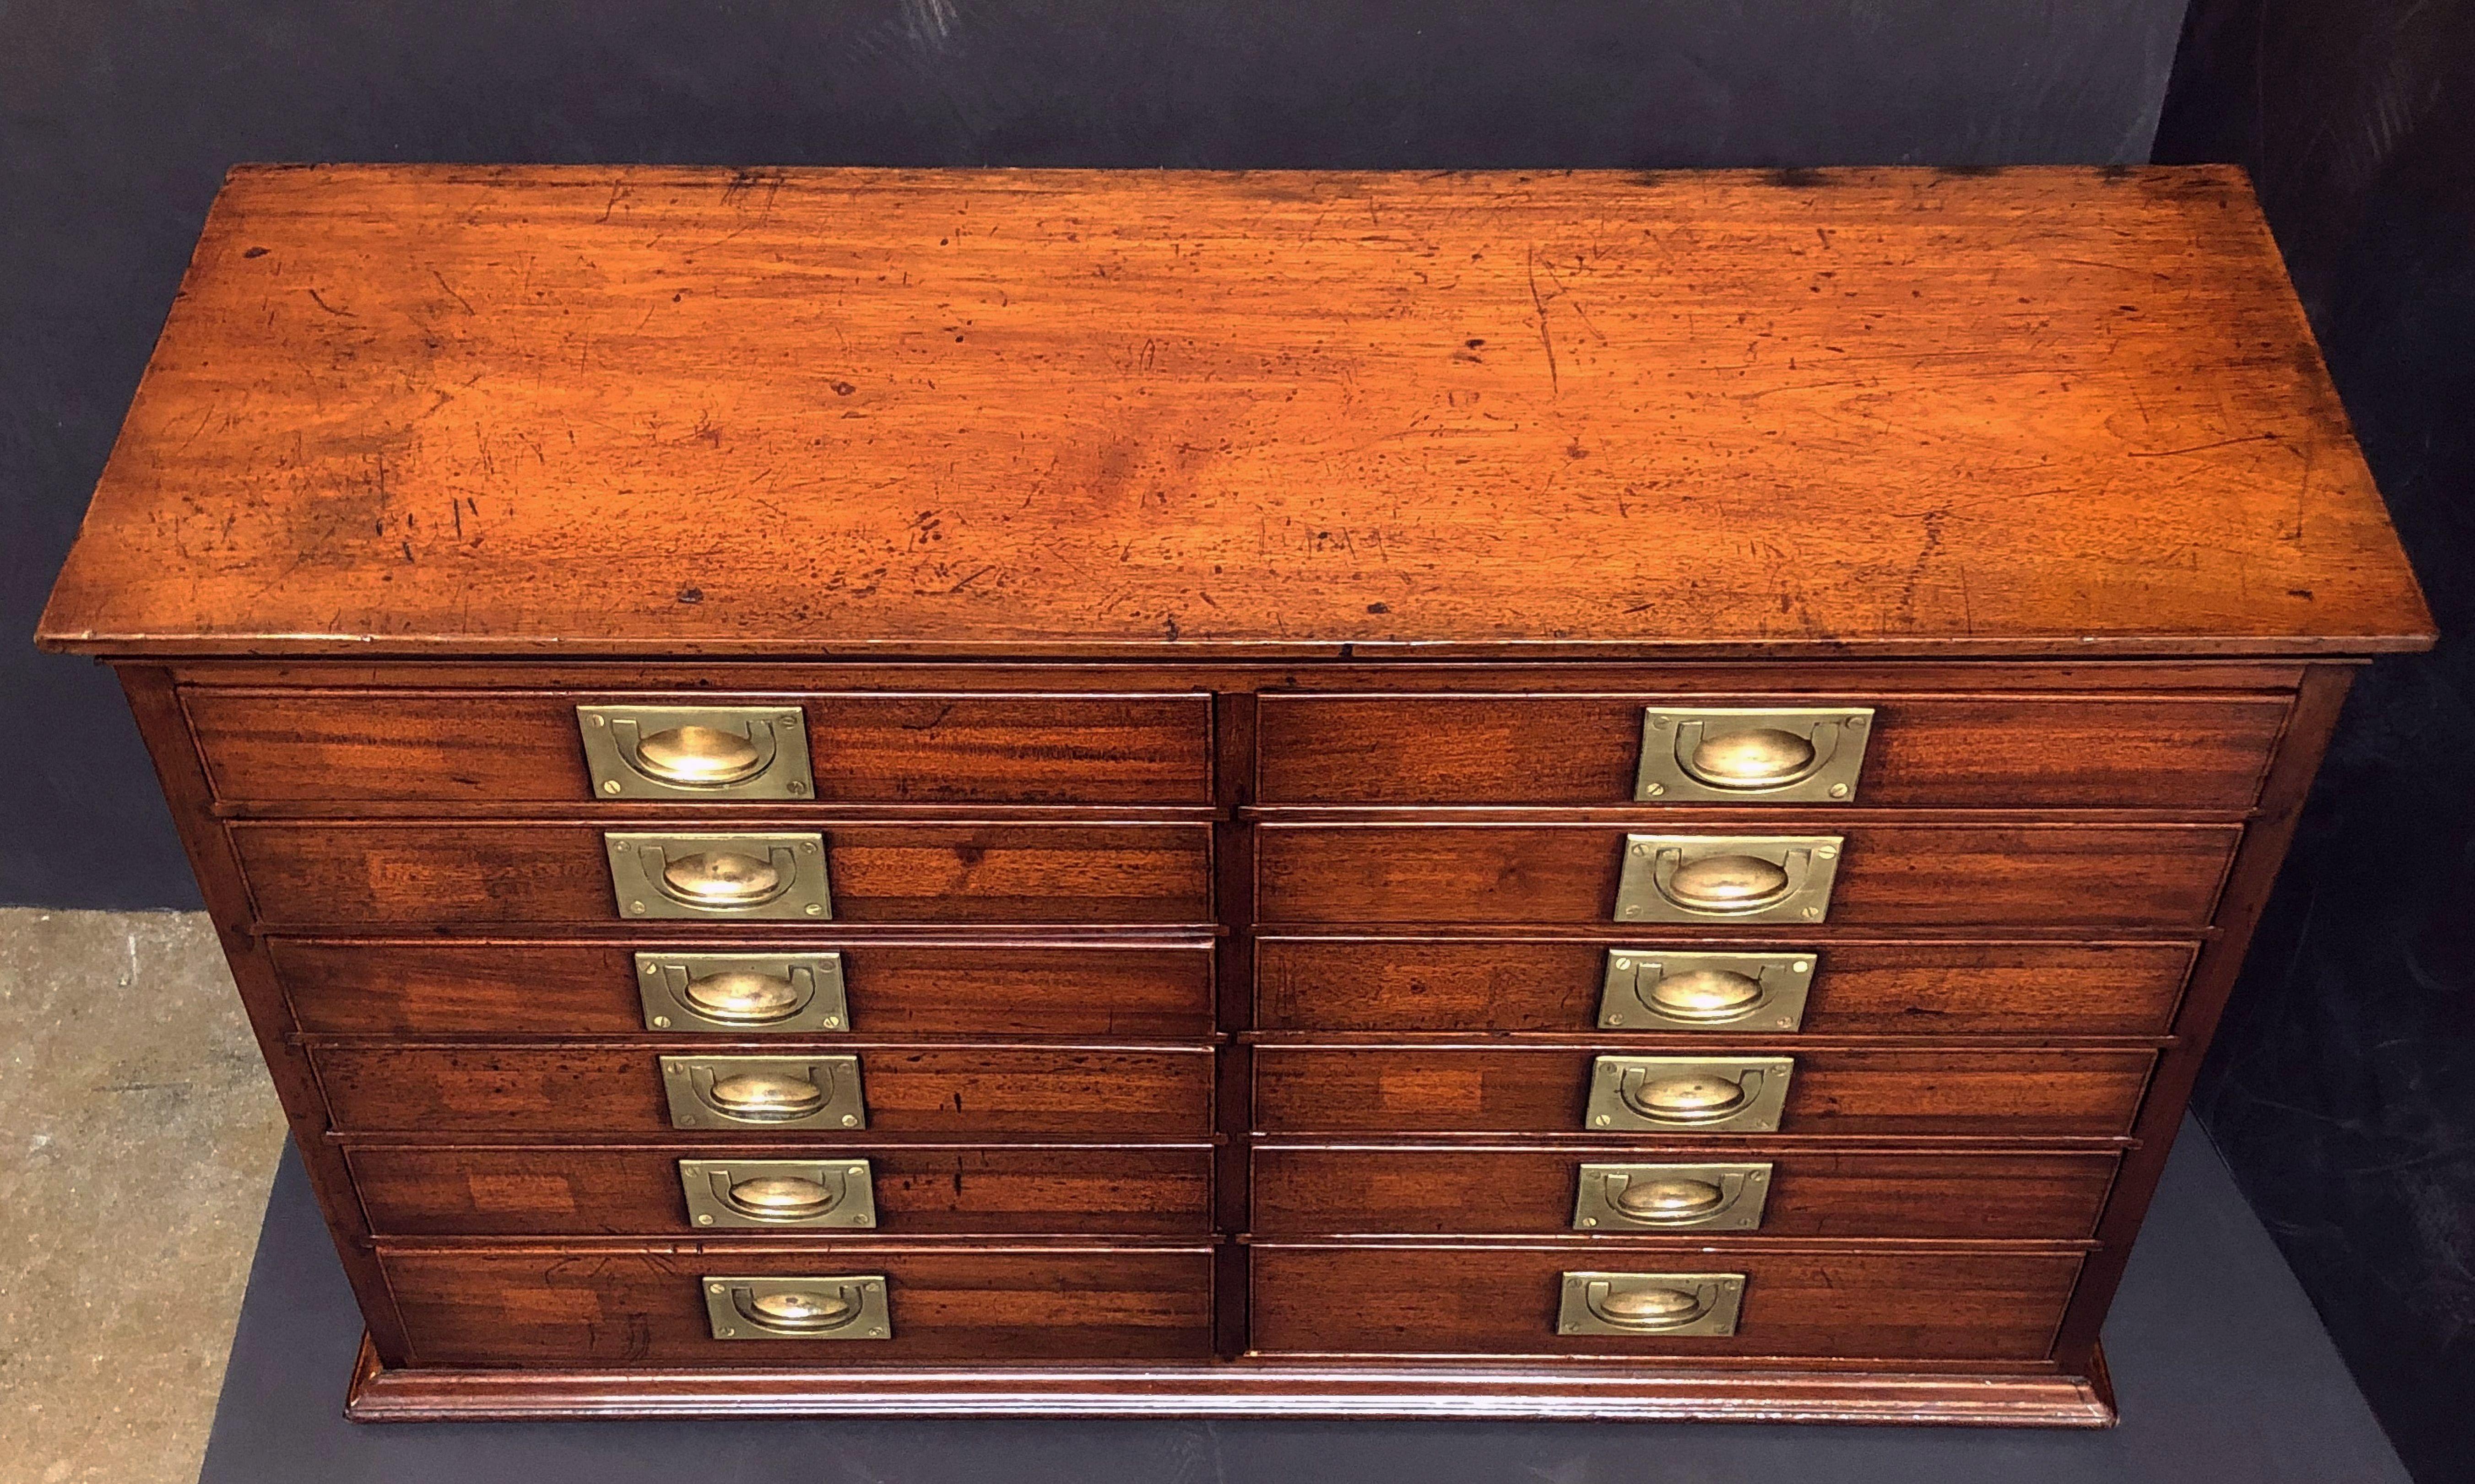 British Military Campaign Flight of Drawers with Brass Hardware 2